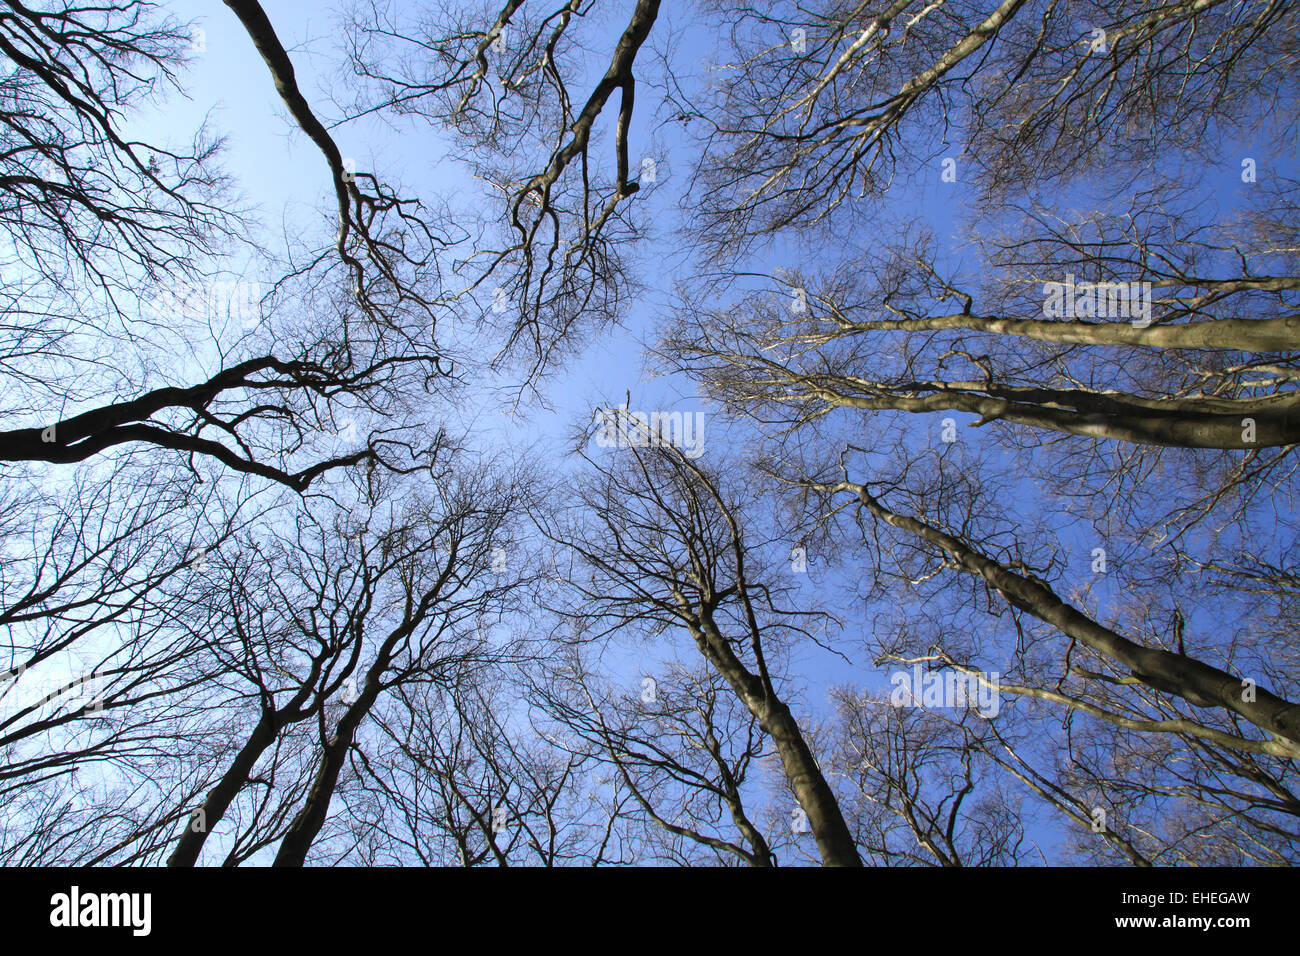 In the beech forest Stock Photo